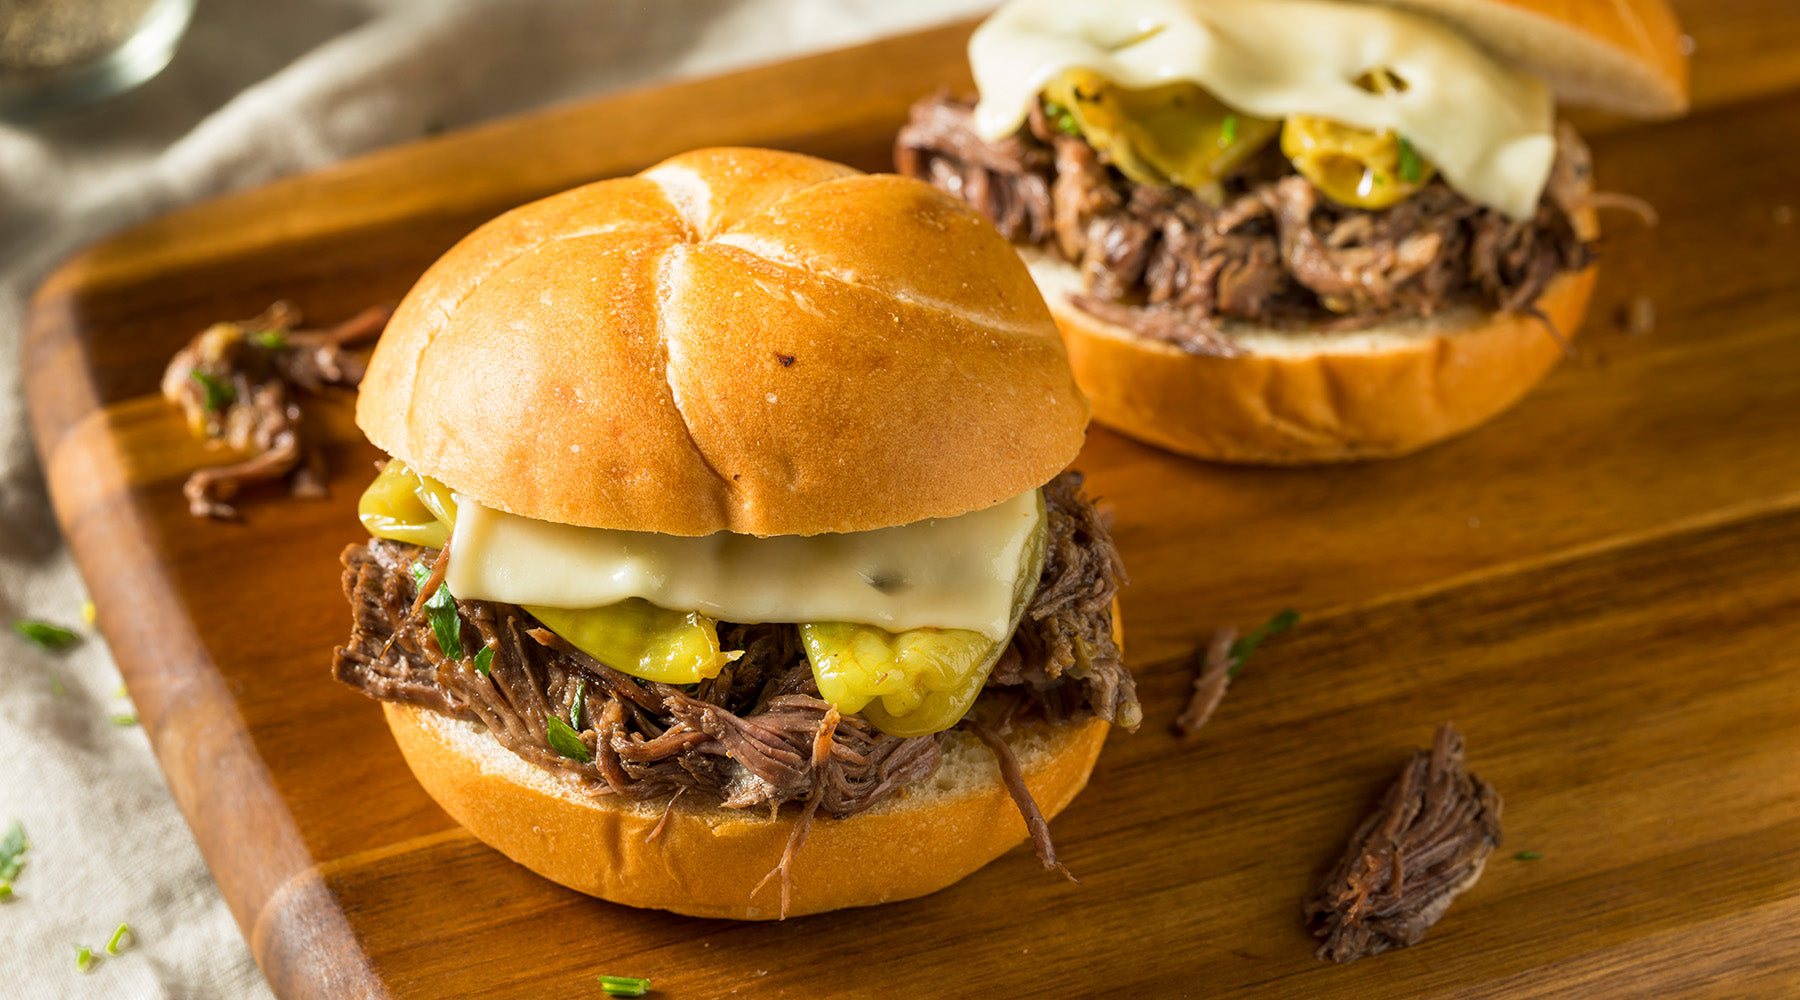 Shredded beef sandwiched in a kaiser roll topped with yellow pepperoncini peppers and cheese